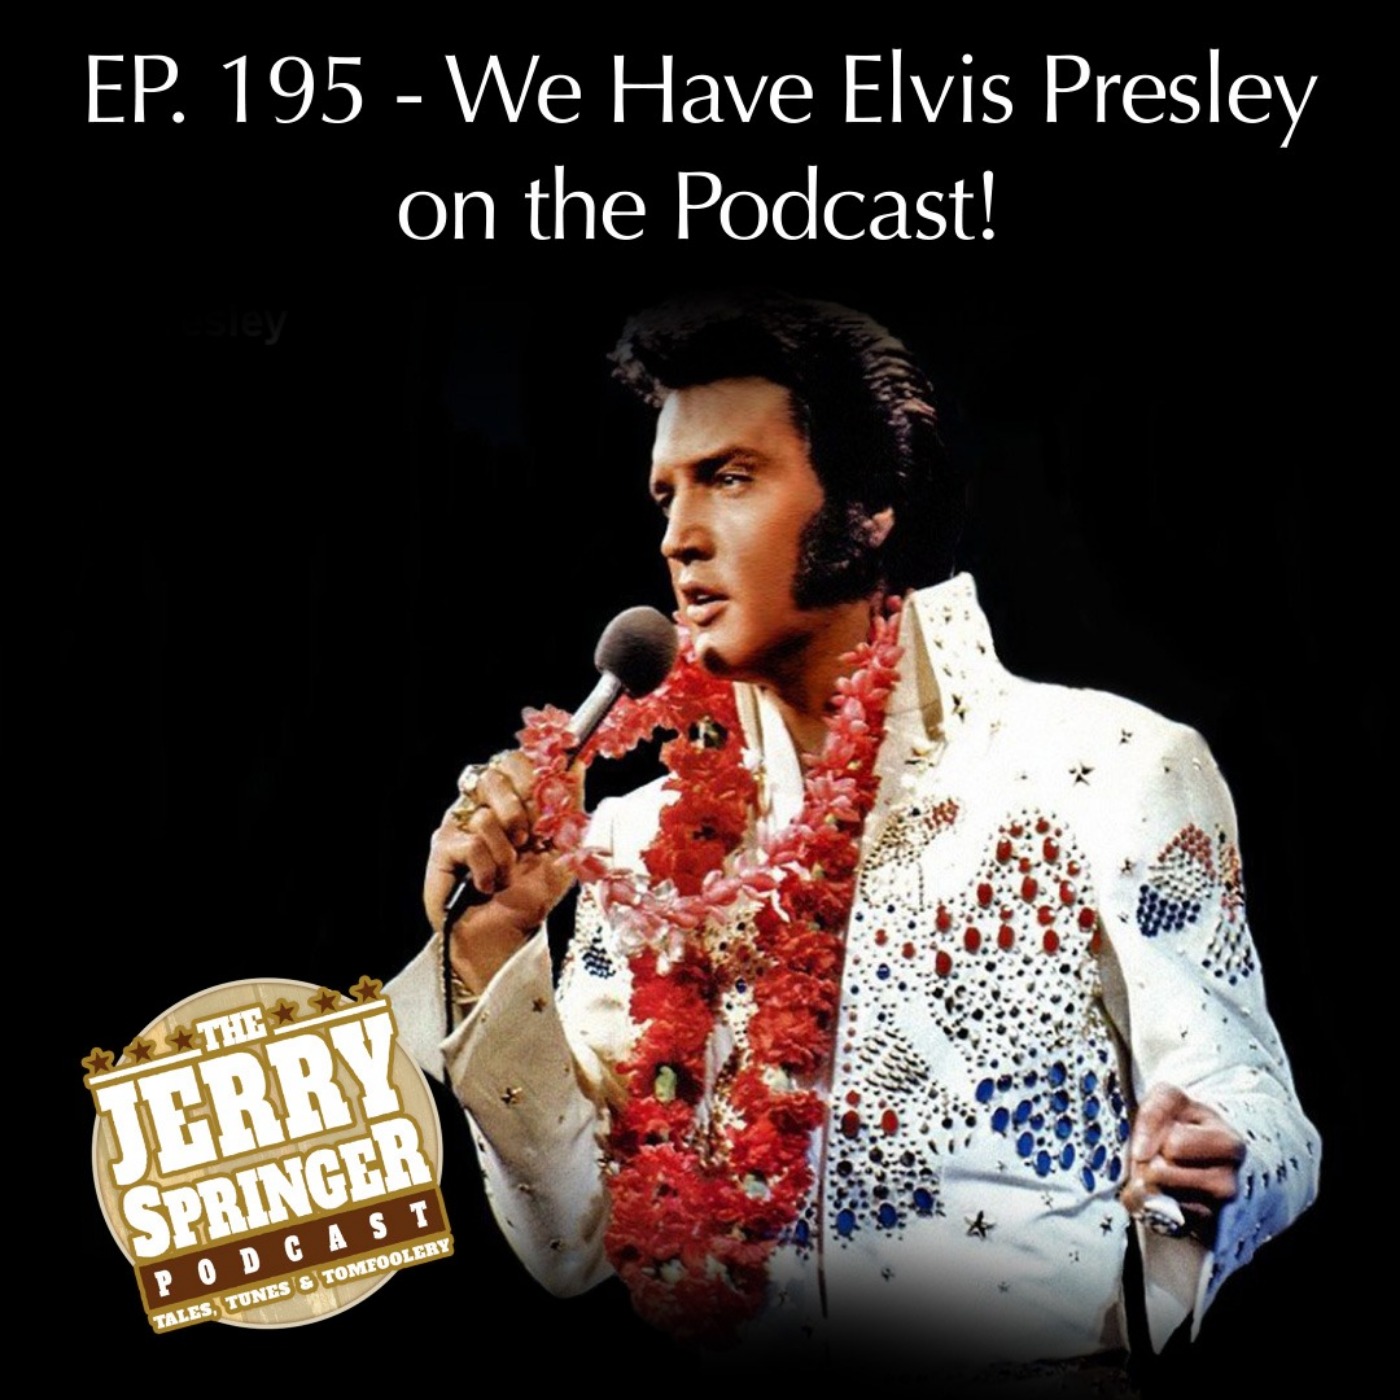 We Have Elvis Presley on the Podcast! EP. 195